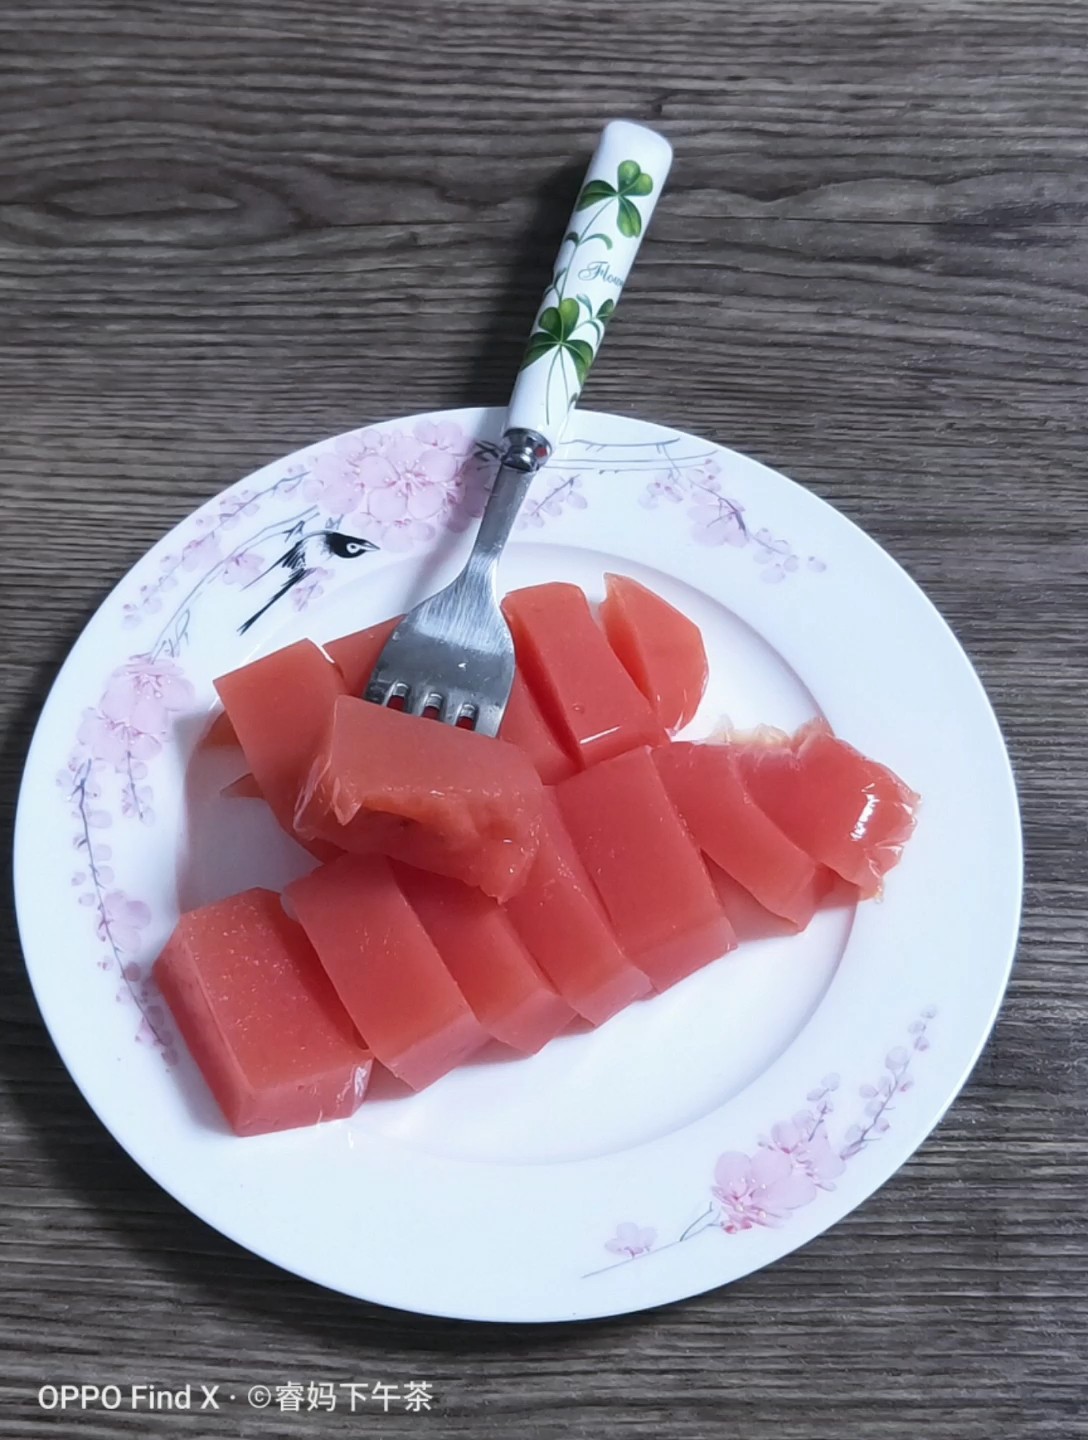 Pea Jelly with Watermelon Sauce recipe